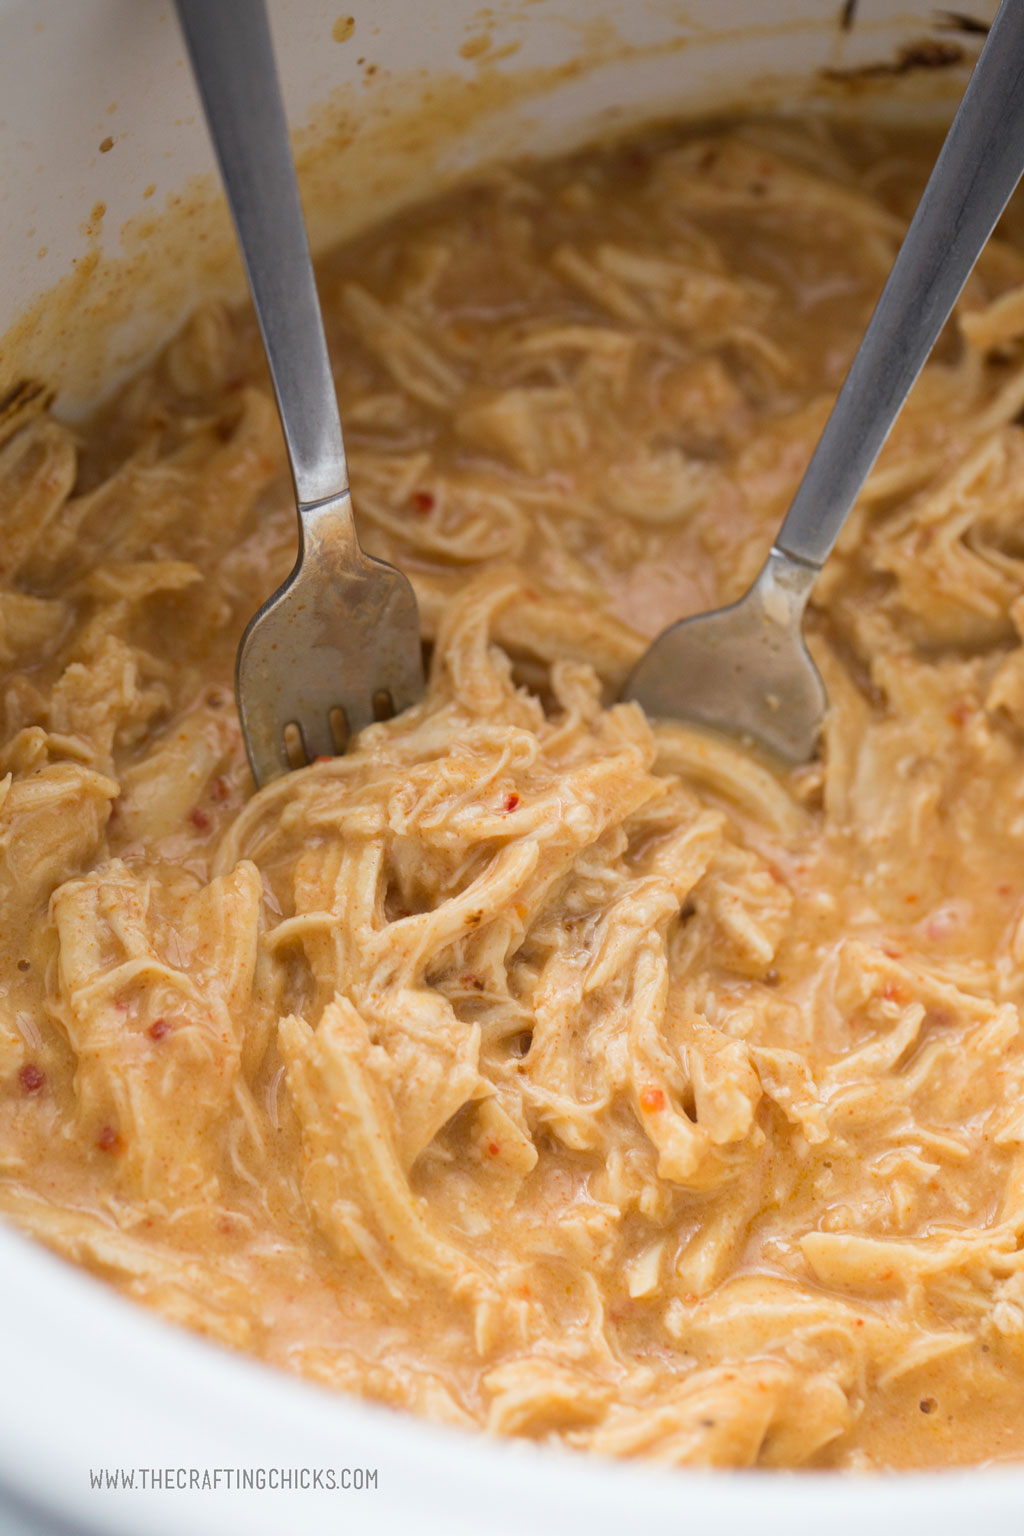 Using forks to pull apart the Crockpot Fiesta Ranch Chicken breast to shred the chicken